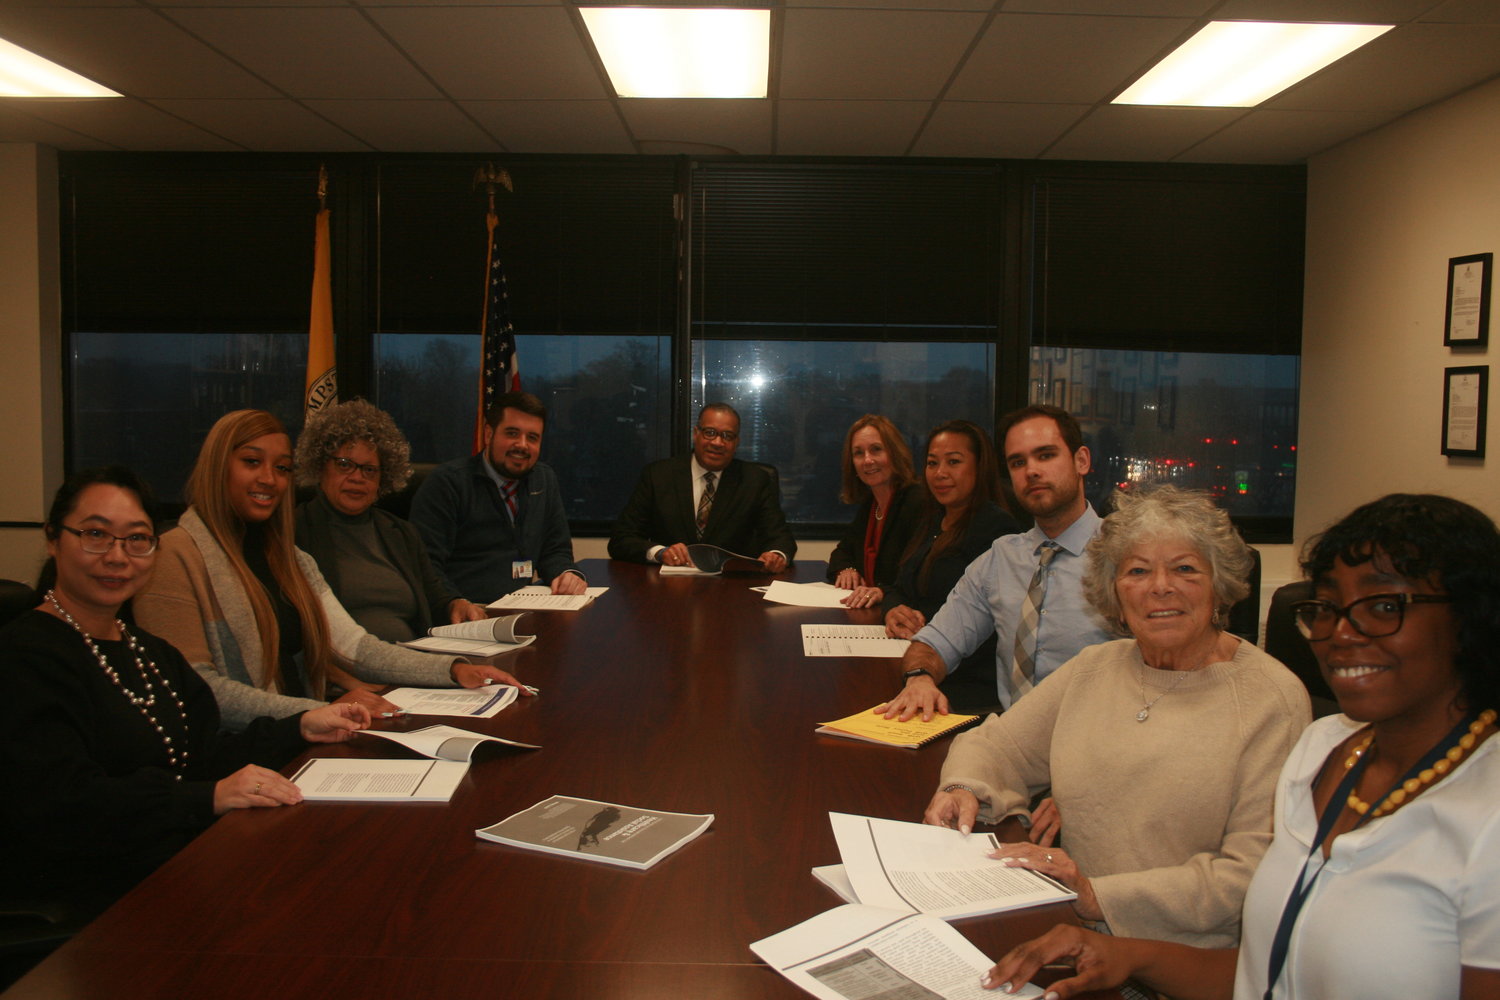 HempsteadWorks employees Lily Dou, far left, Tamia Anderson, Maria Reed, Kurt Rockensies, Eric Mallette, Mary Drangel, Nene Alameda, Christopher DeRita and Jeanie Robano-Stocker provide comprehensive career services for Hempstead residents.